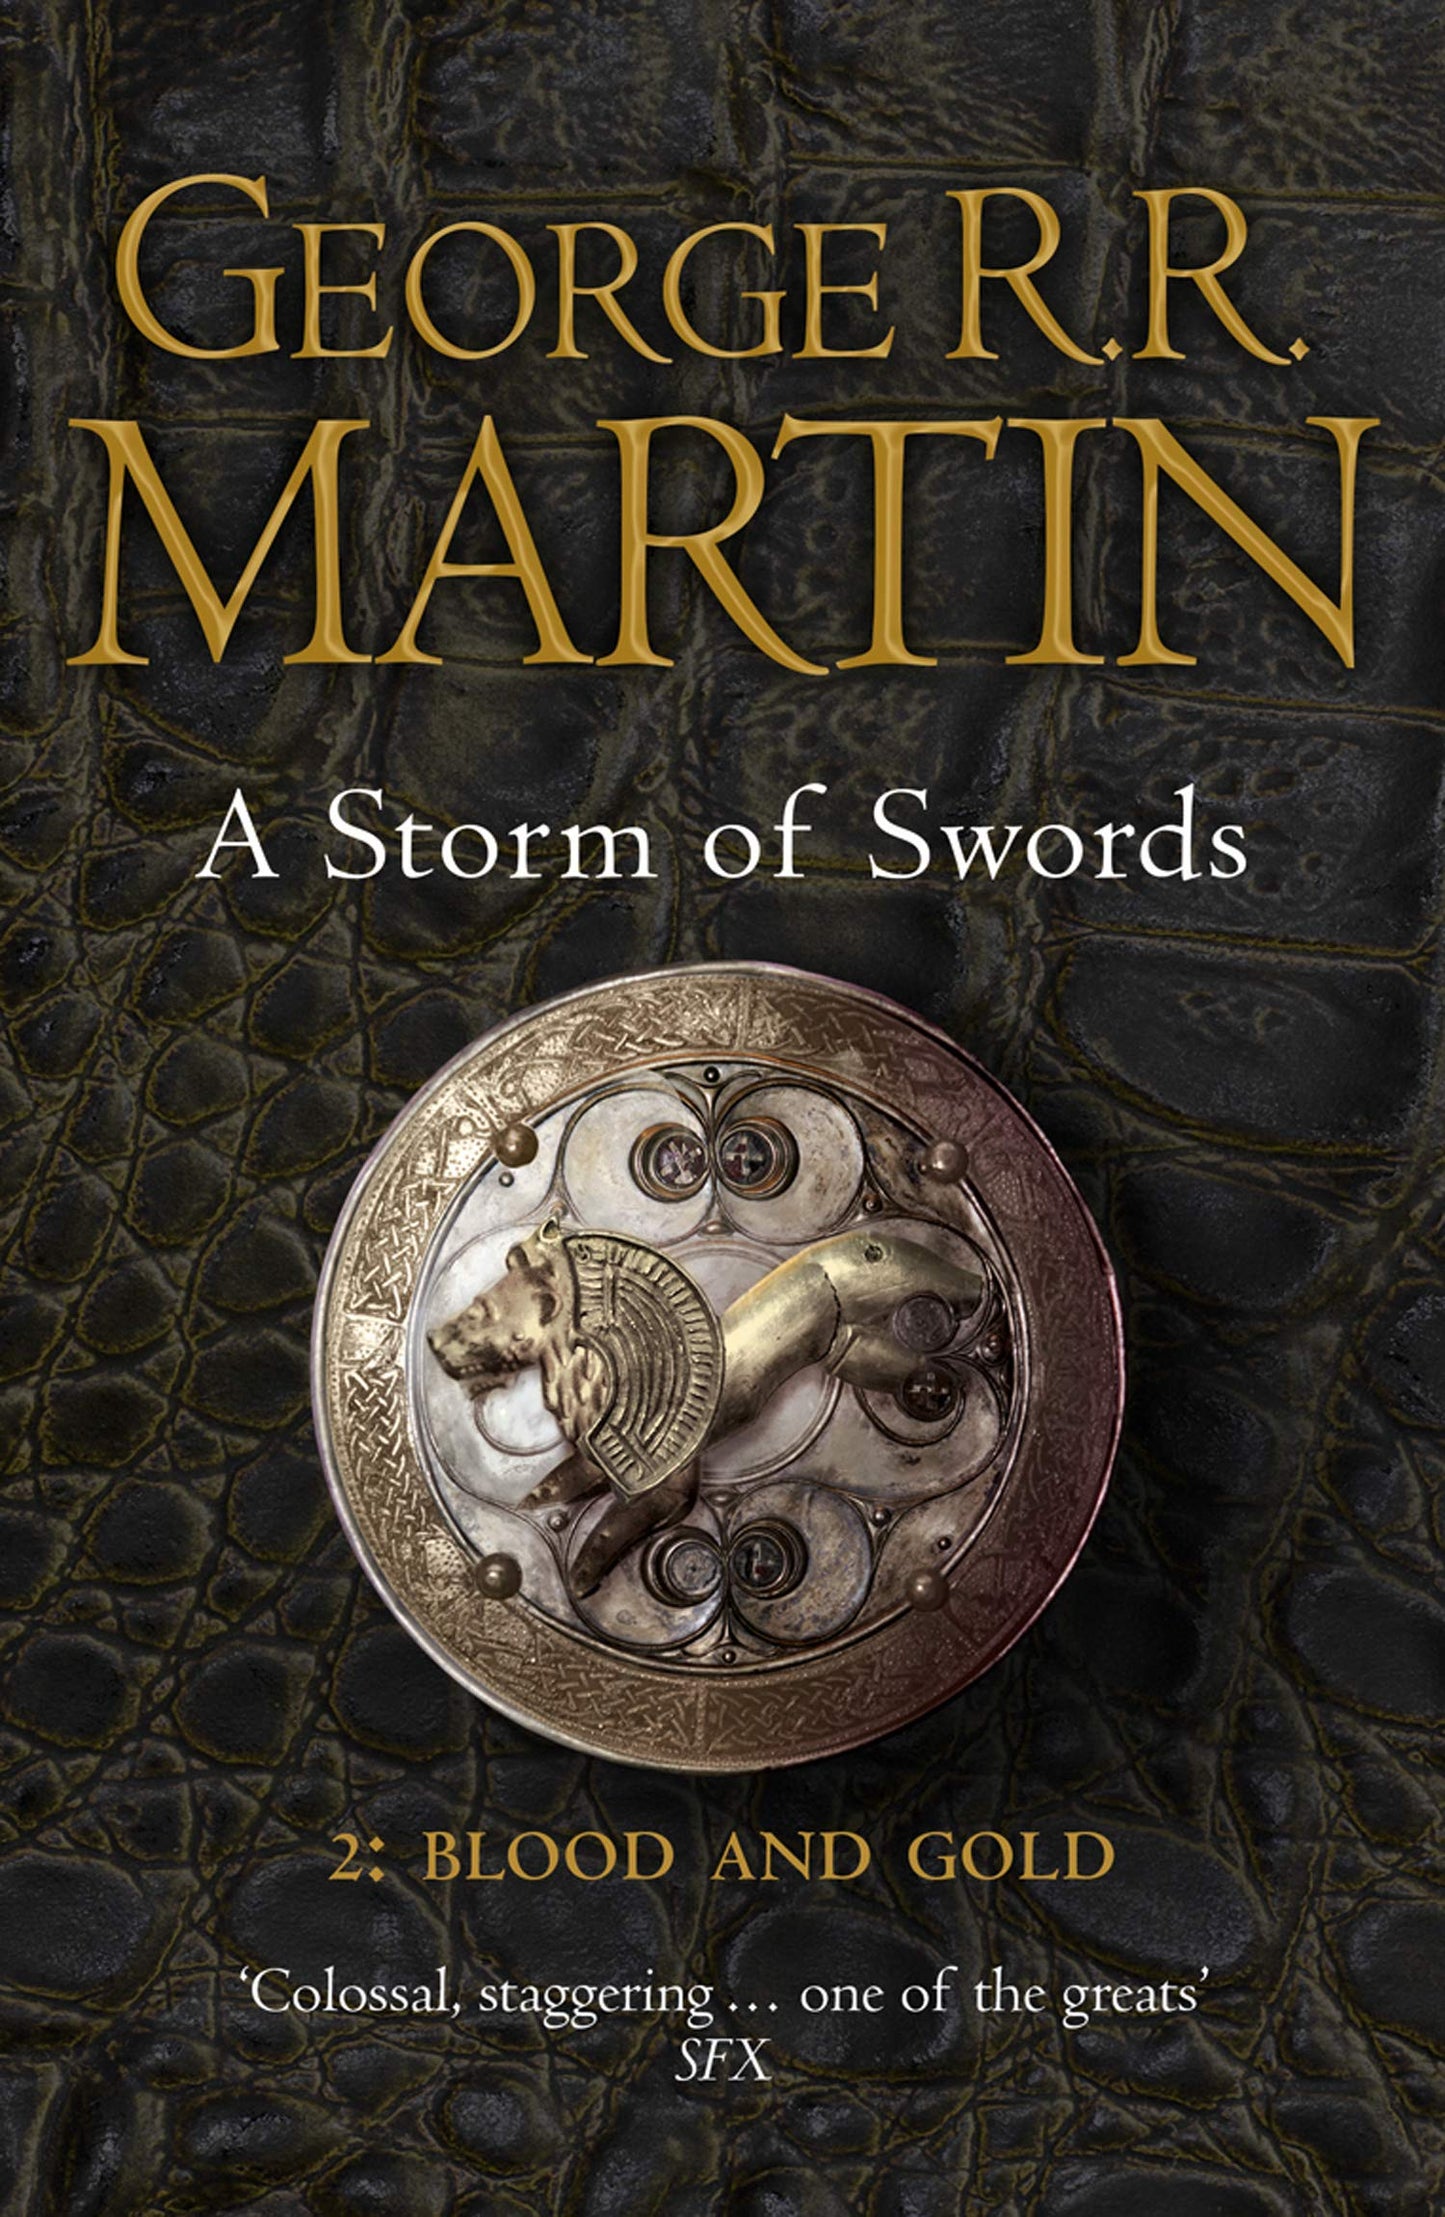 A Storm of Swords: Blood and Gold by George R.R. Martin (A Song Of Ice And Fire #3 Part Two)